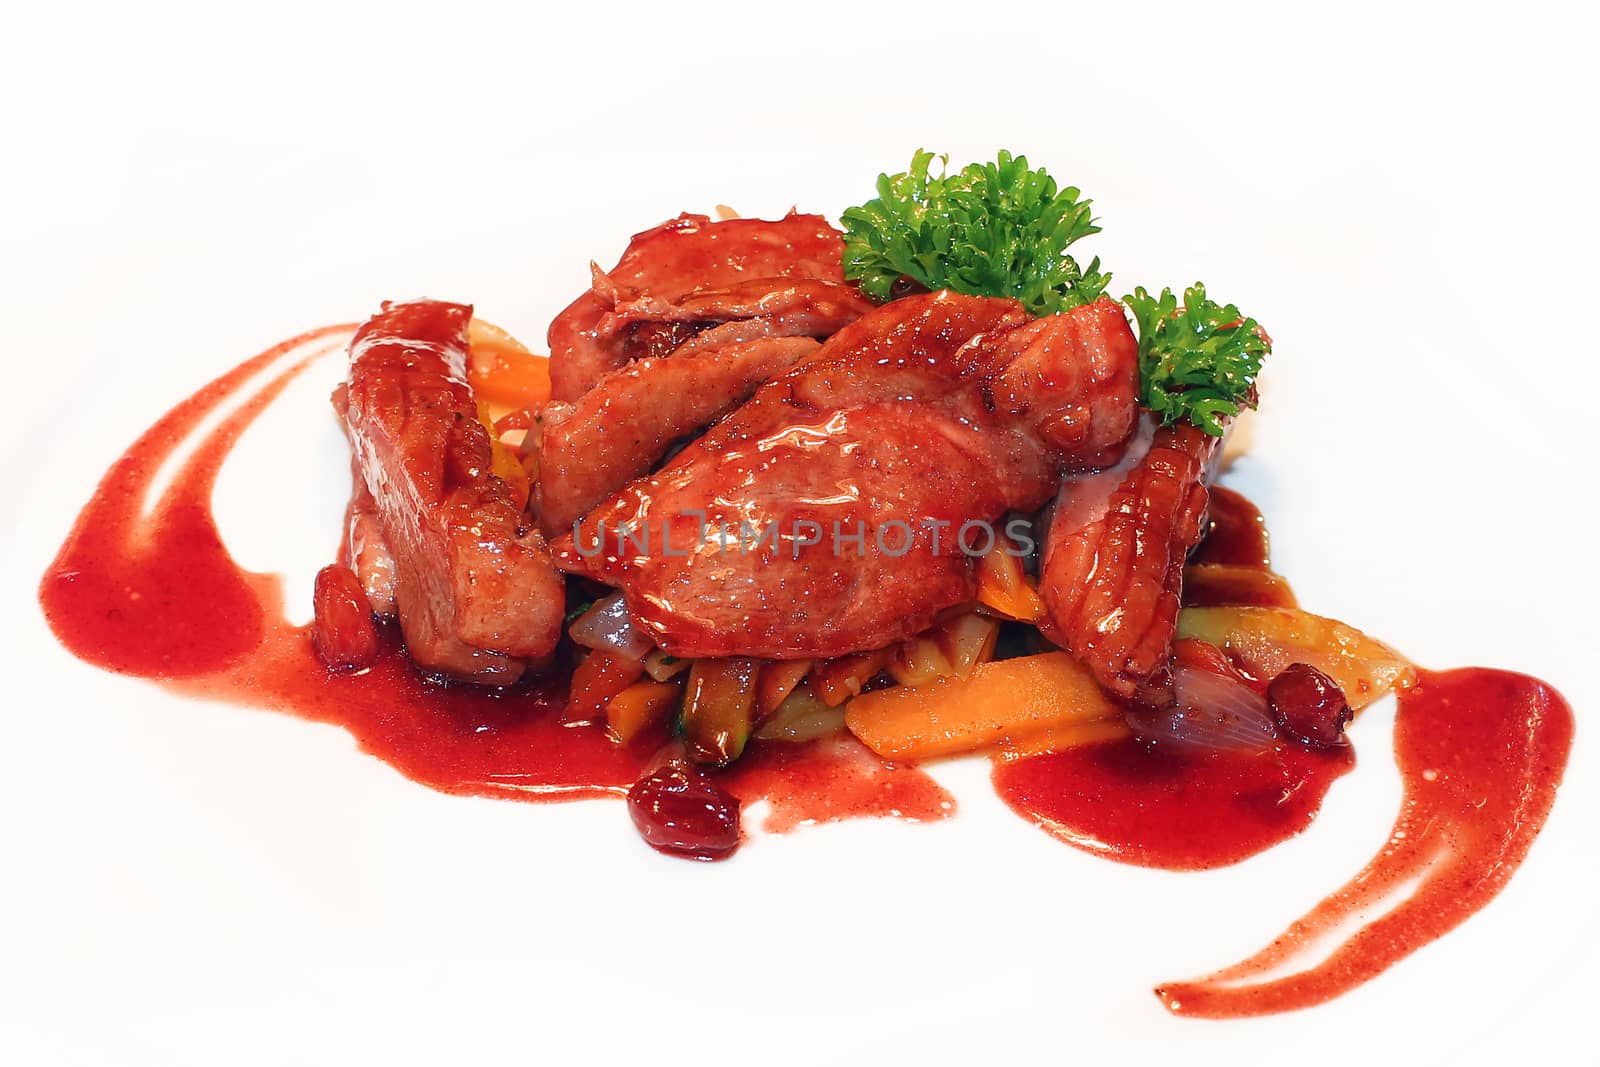 Duck Dish by ziss